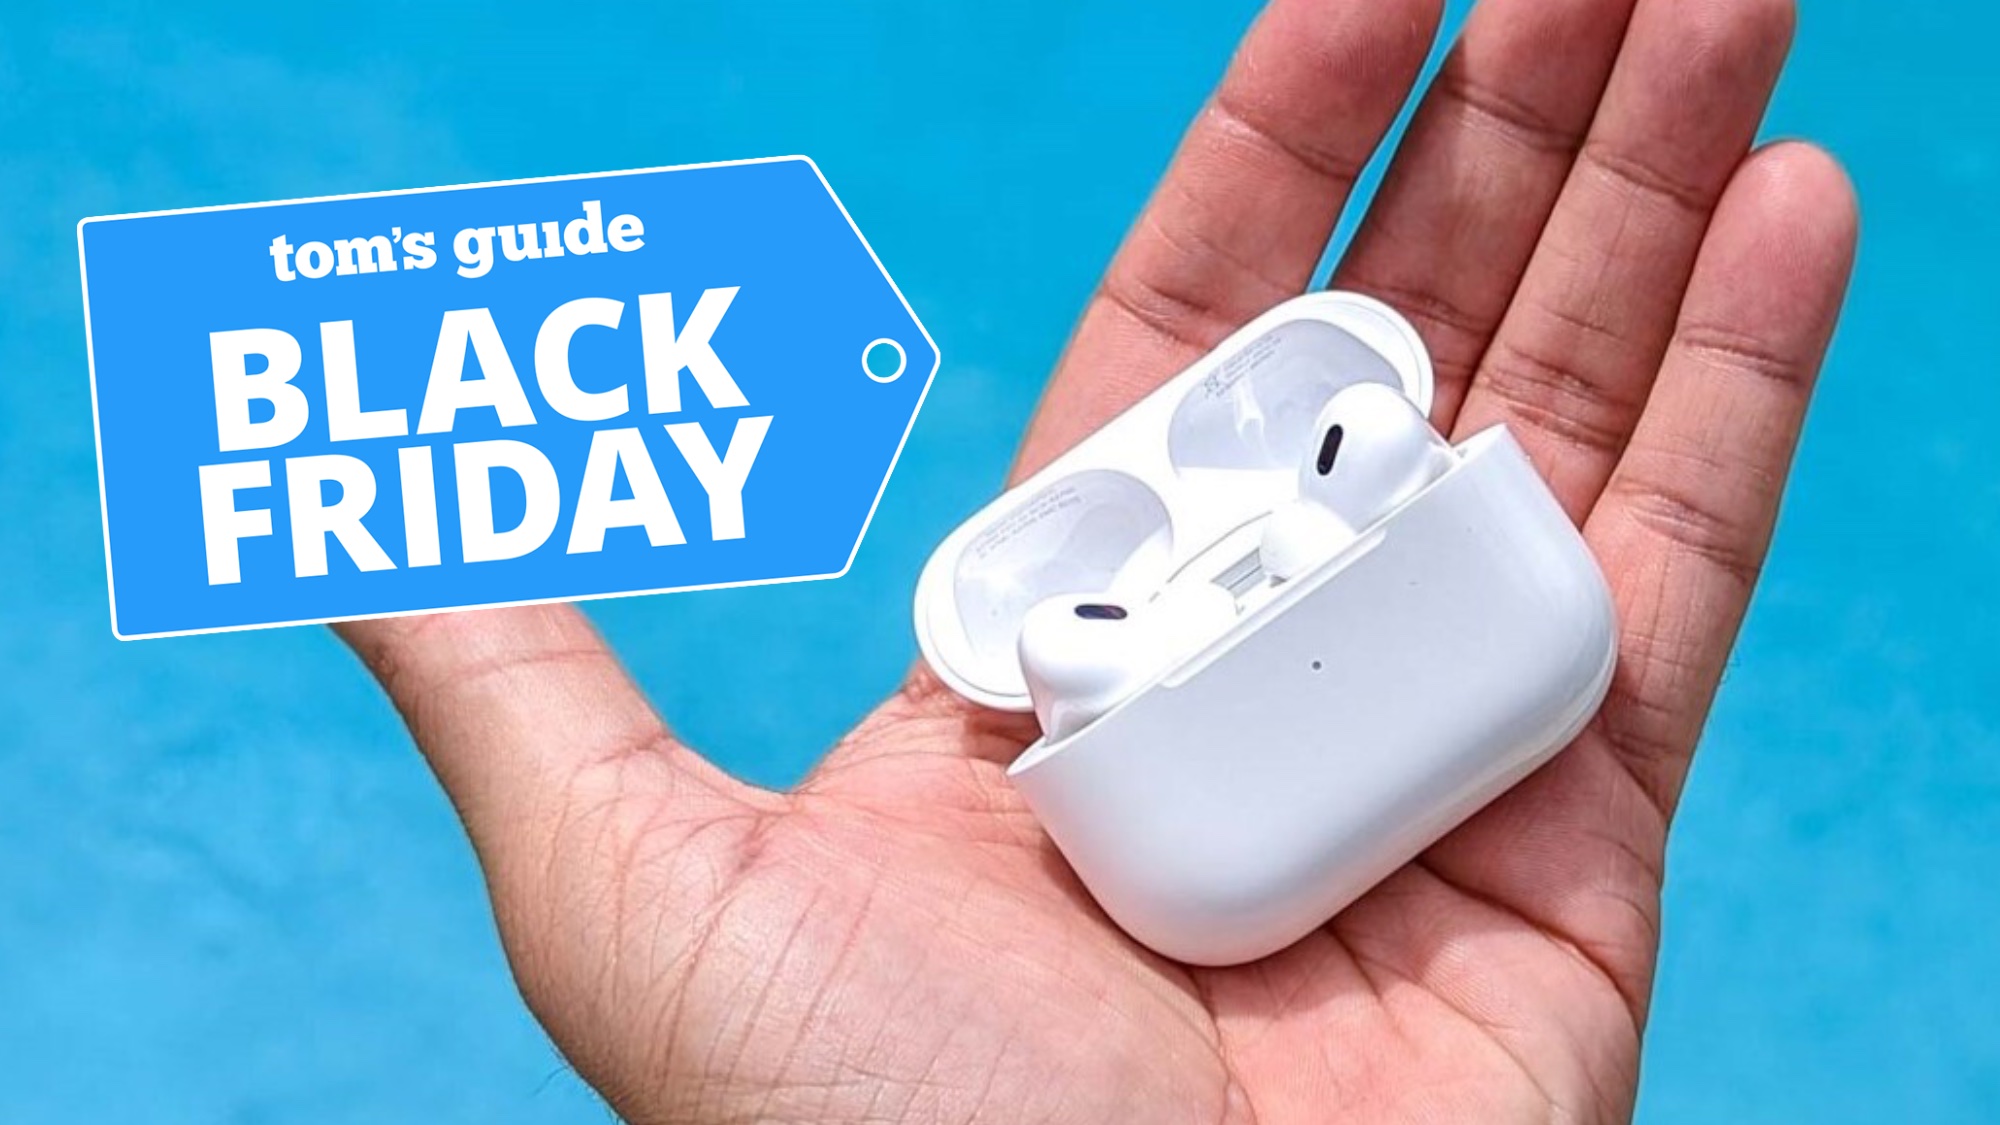 The Newest Apple AirPods Pro (USB Model) Is Back Down to Black Friday  Pricing - IGN